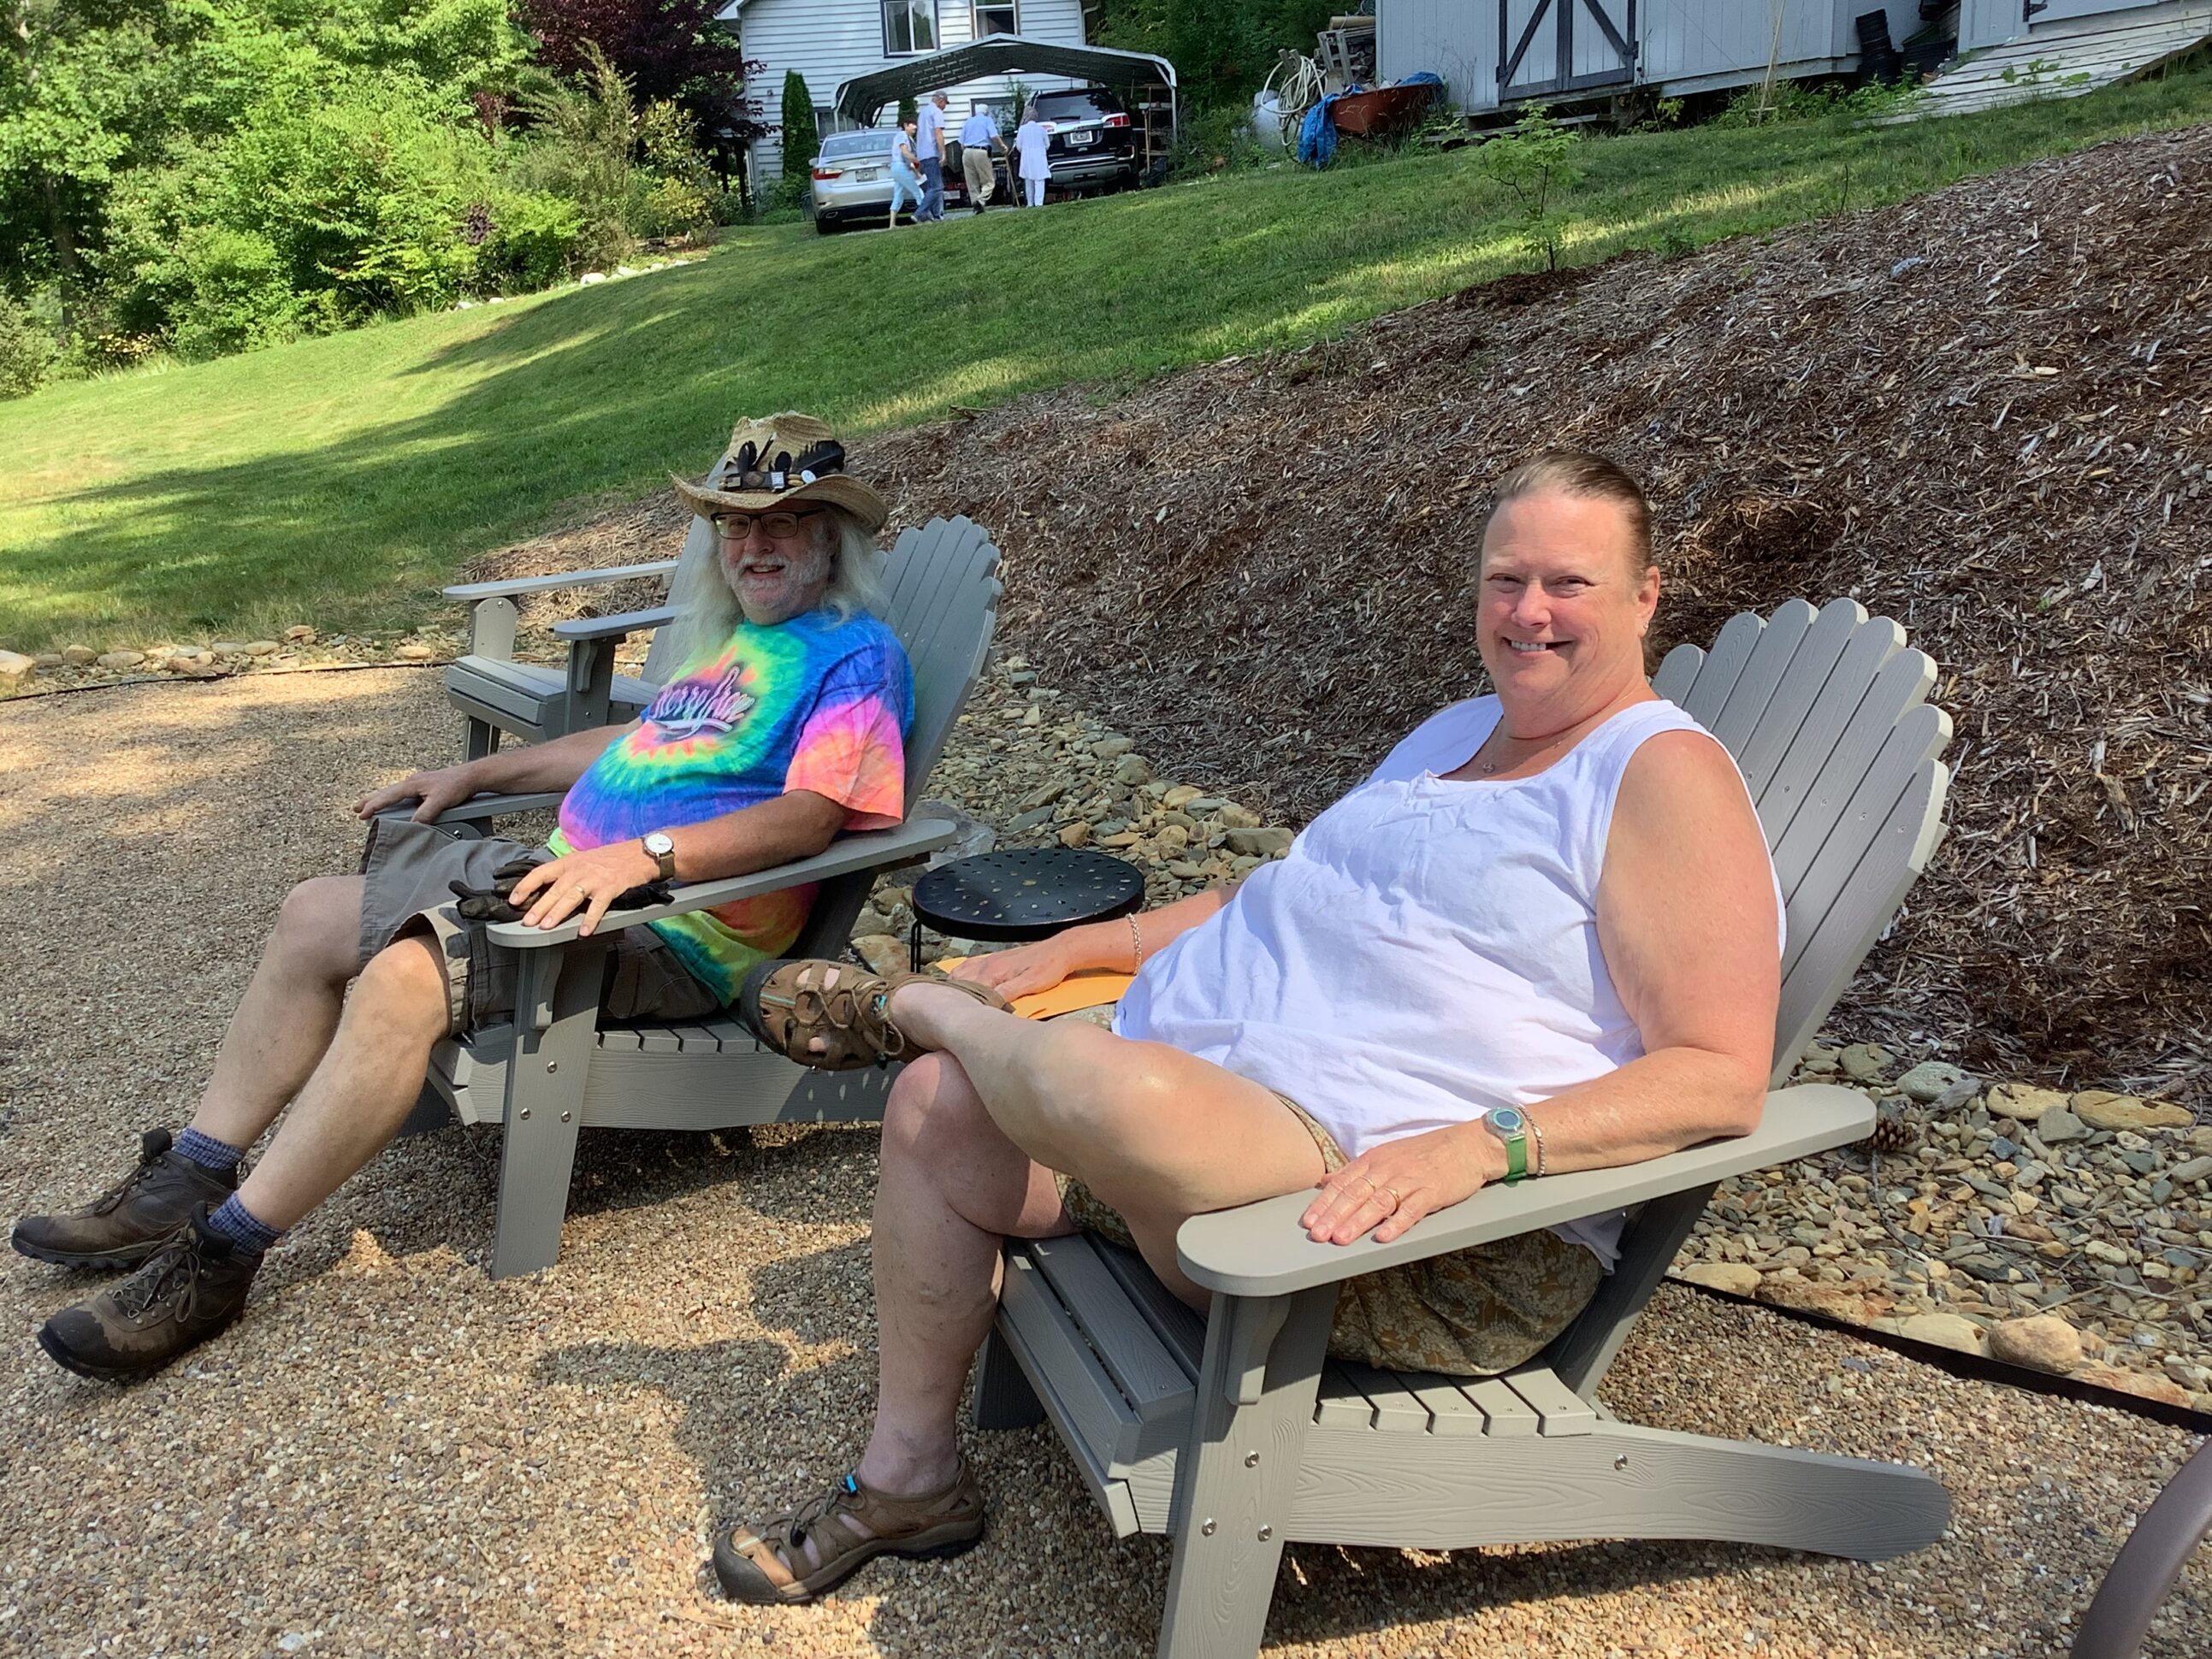 Two people sitting in lawn chairs on a gravel path.